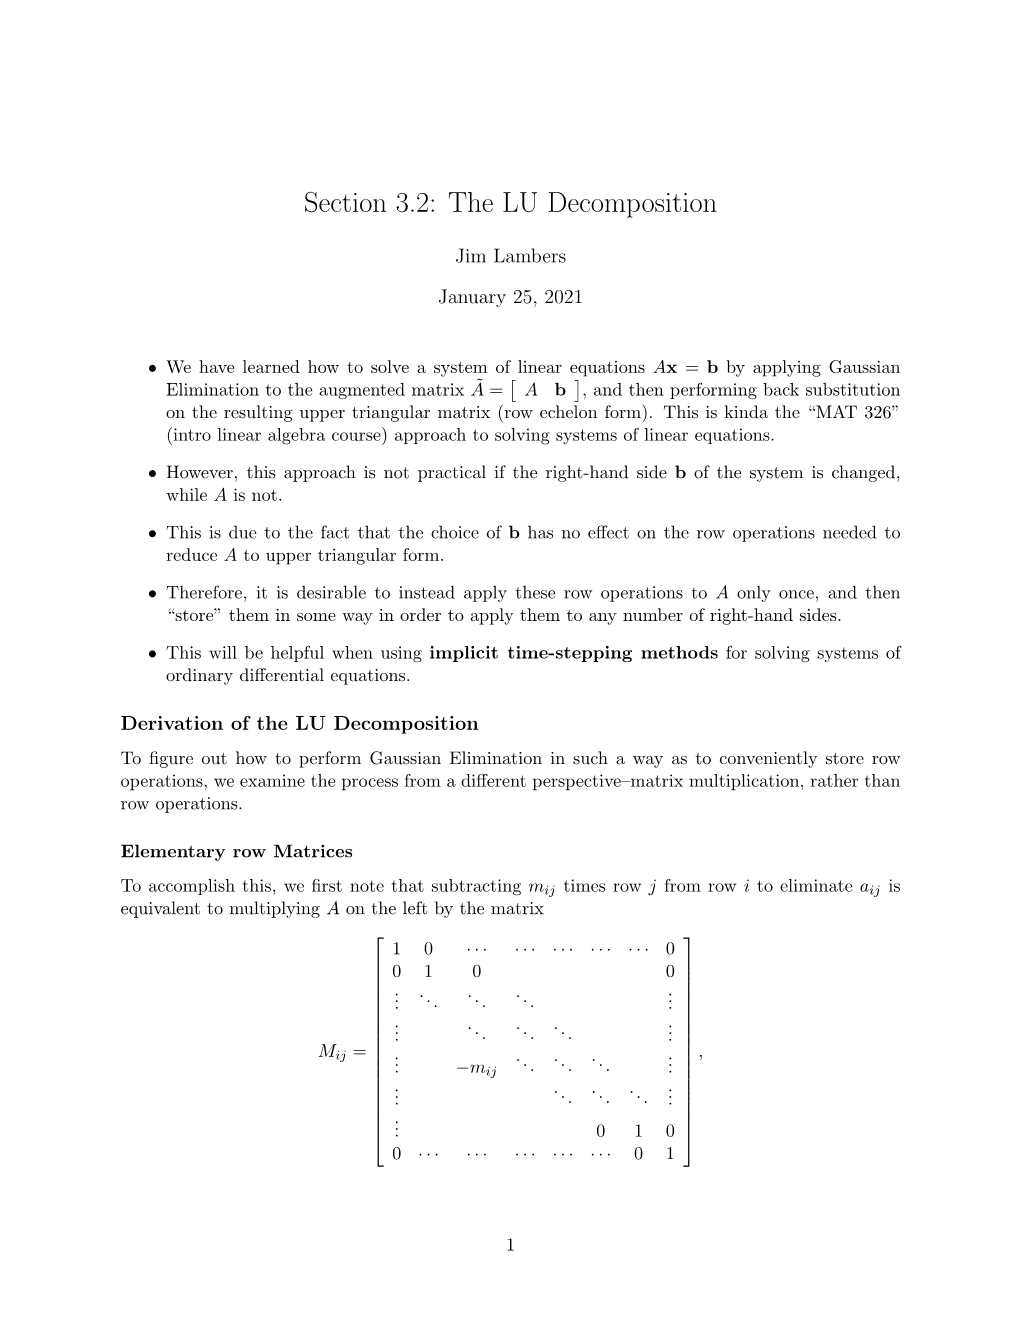 Section 3.2: the LU Decomposition